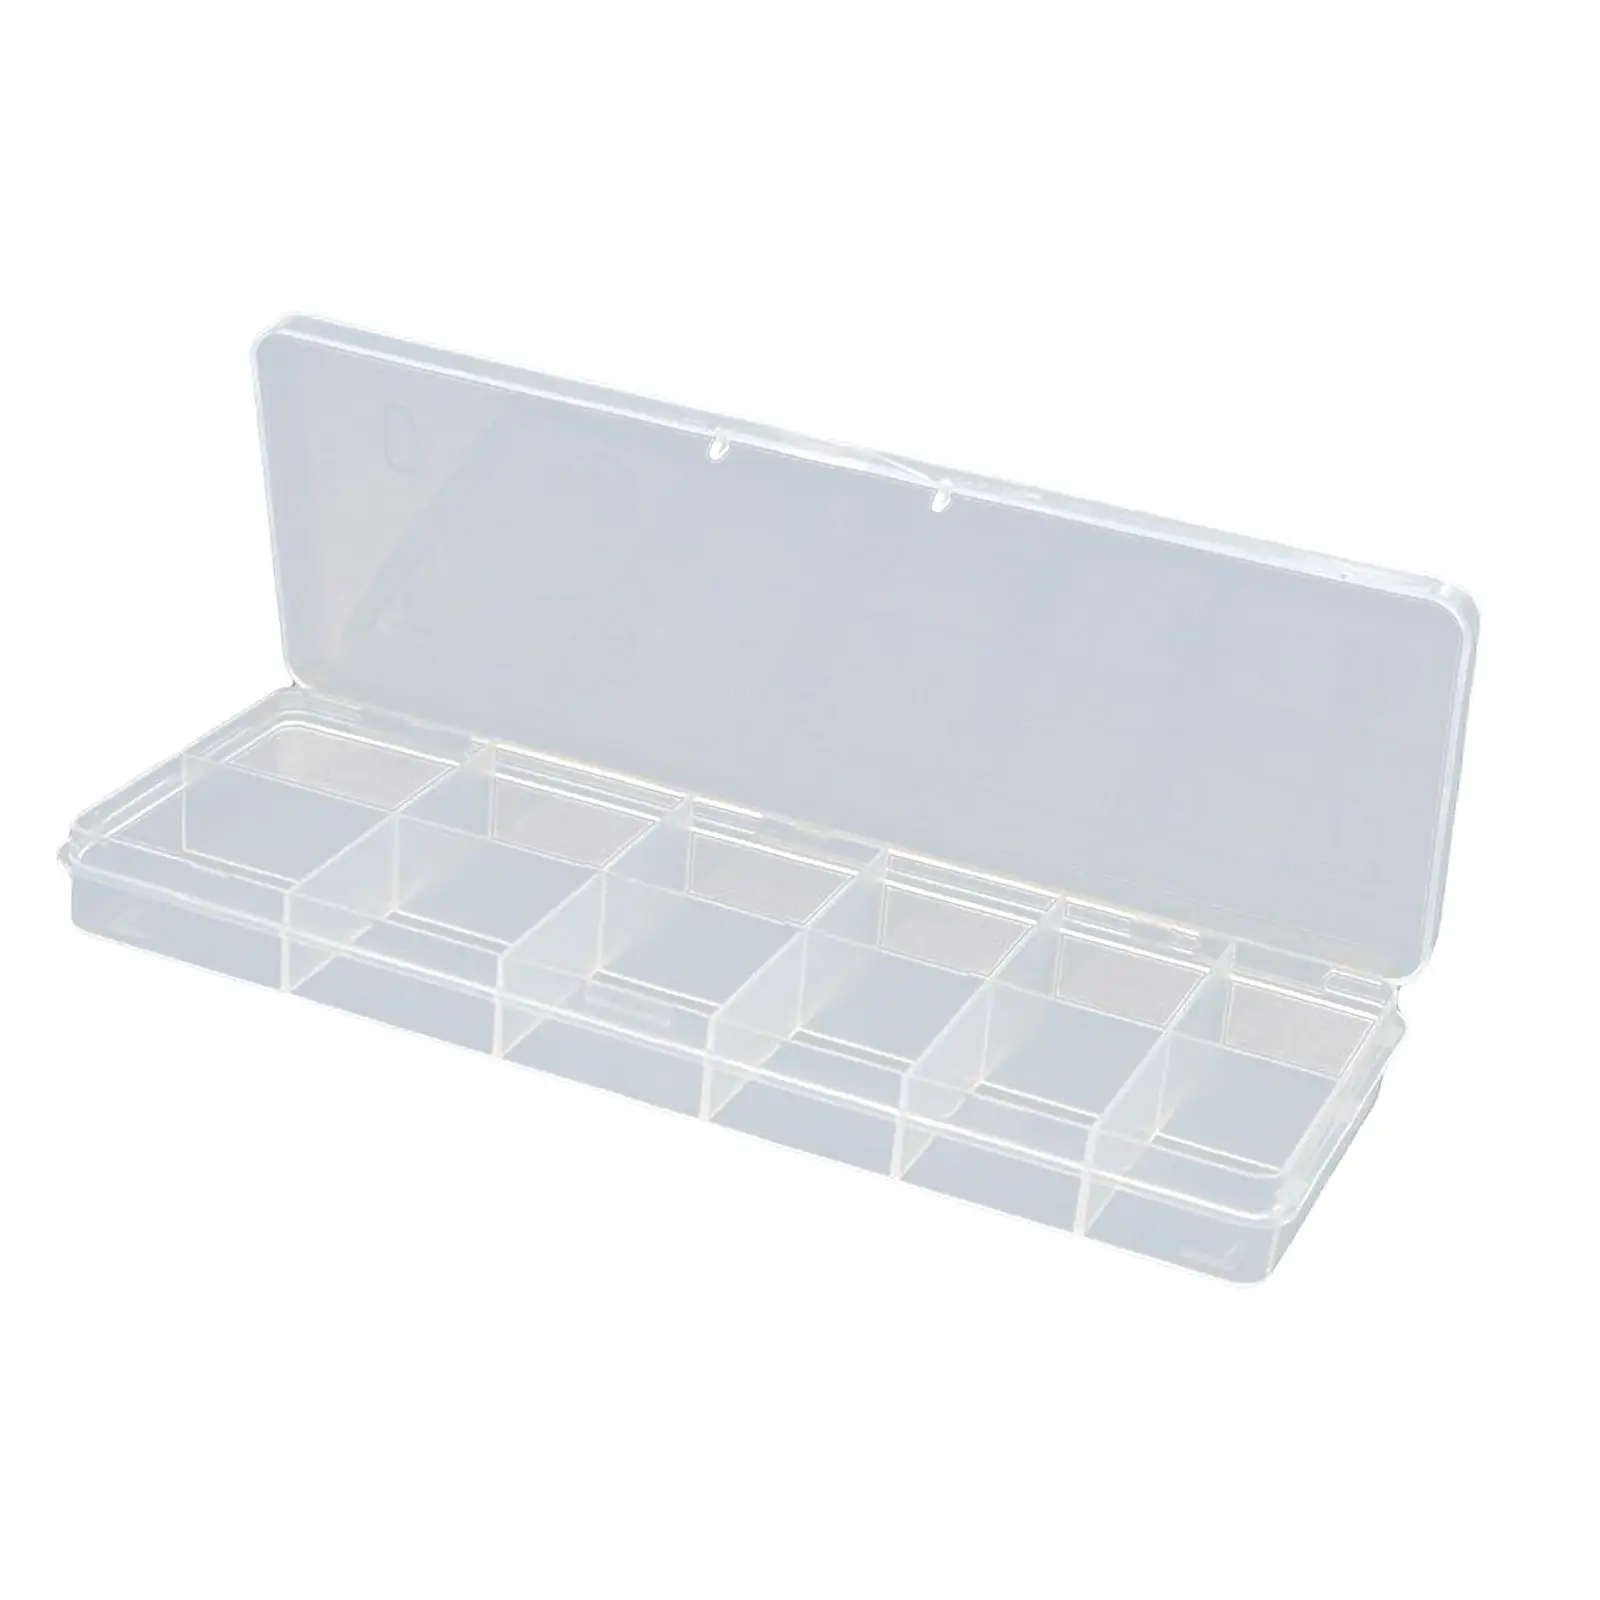 Plastic Nail Art Tip Storage Organizer Box with 10 Grid Boxes 12 Slots Empty Nail Art Tools Case for Beads Glitters Art Crafts